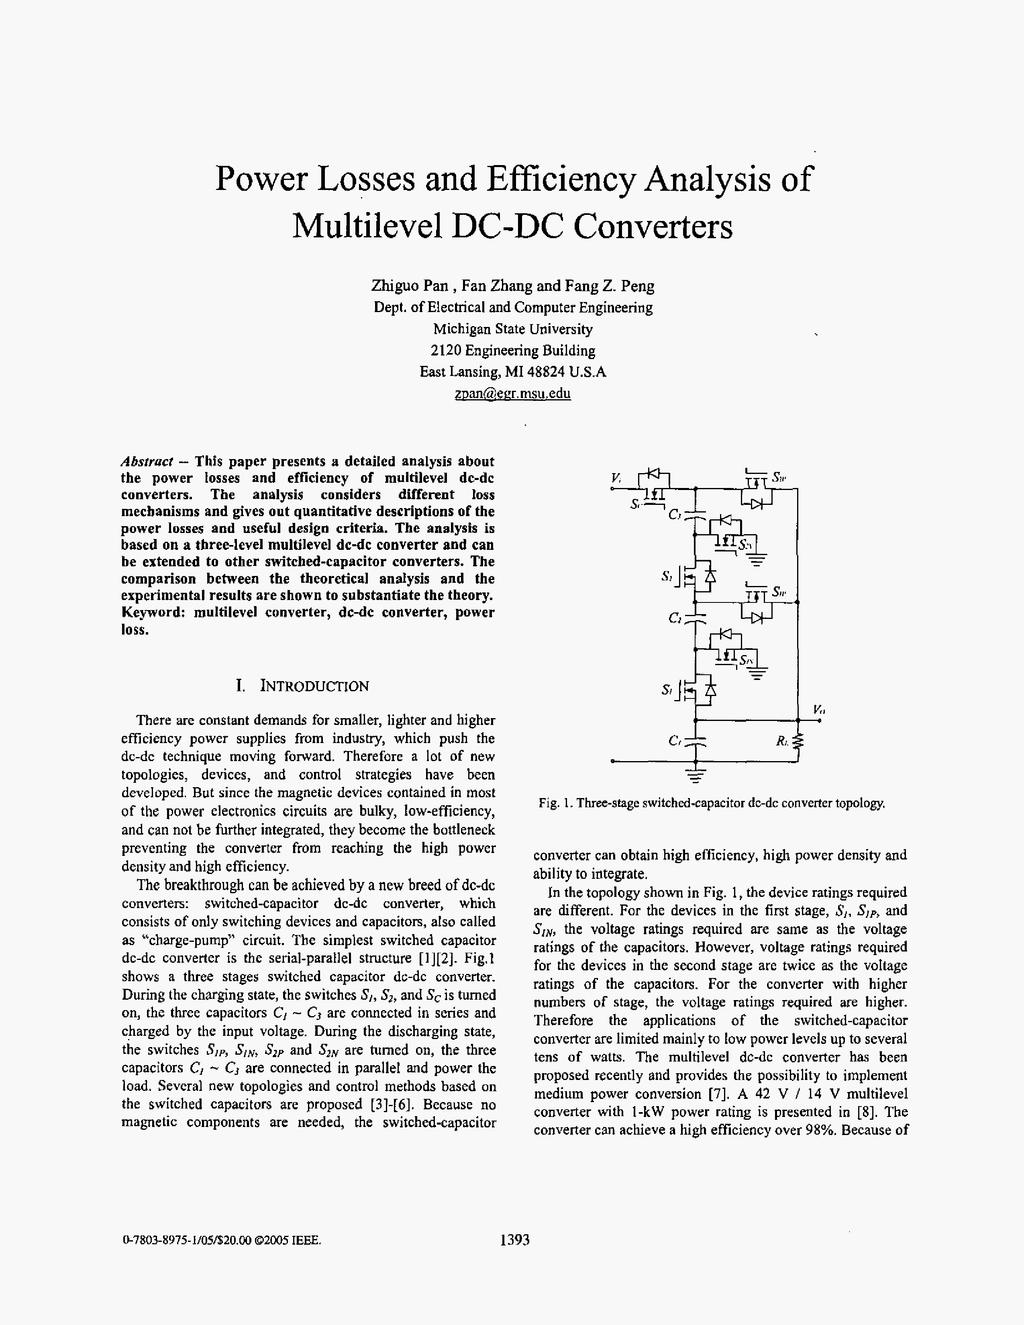 Power Losses and Efficiency Analysis of Multilevel DC-DC Converters Zhguo Pan, Fan Zhang and Fang Z. Peng Dept.